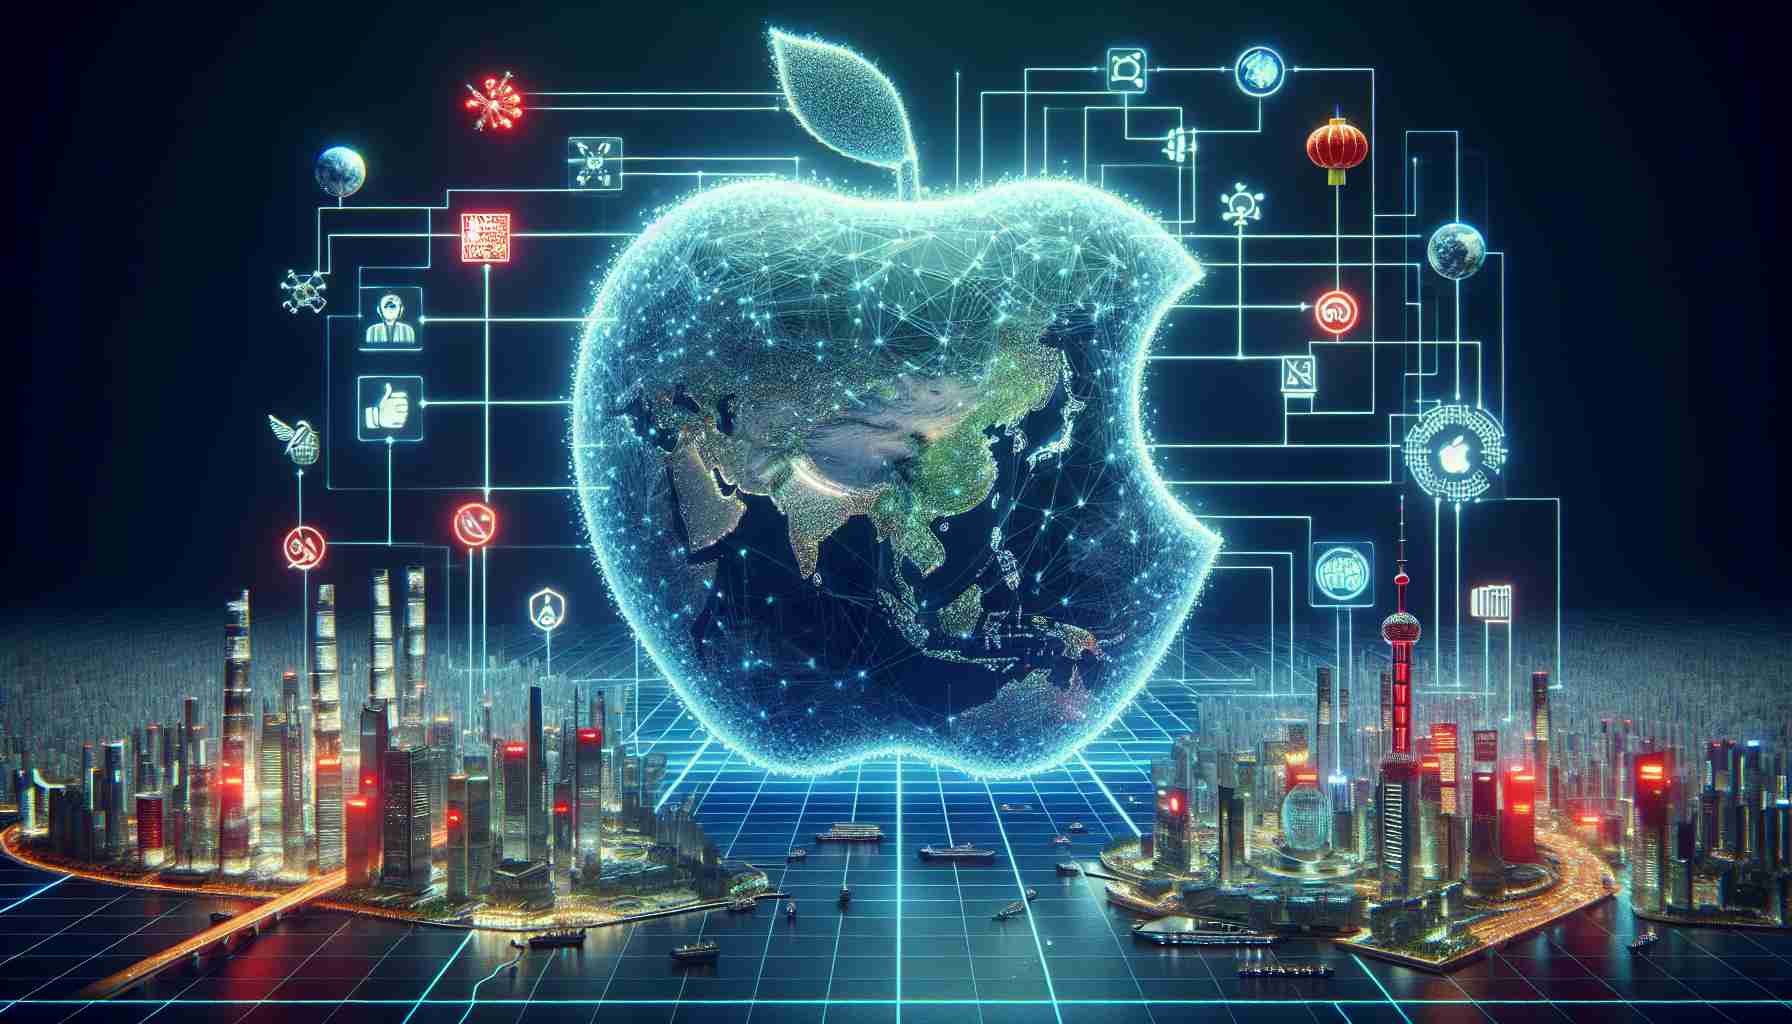 Apple’s Strategic Partnerships in China for AI Market Expansion